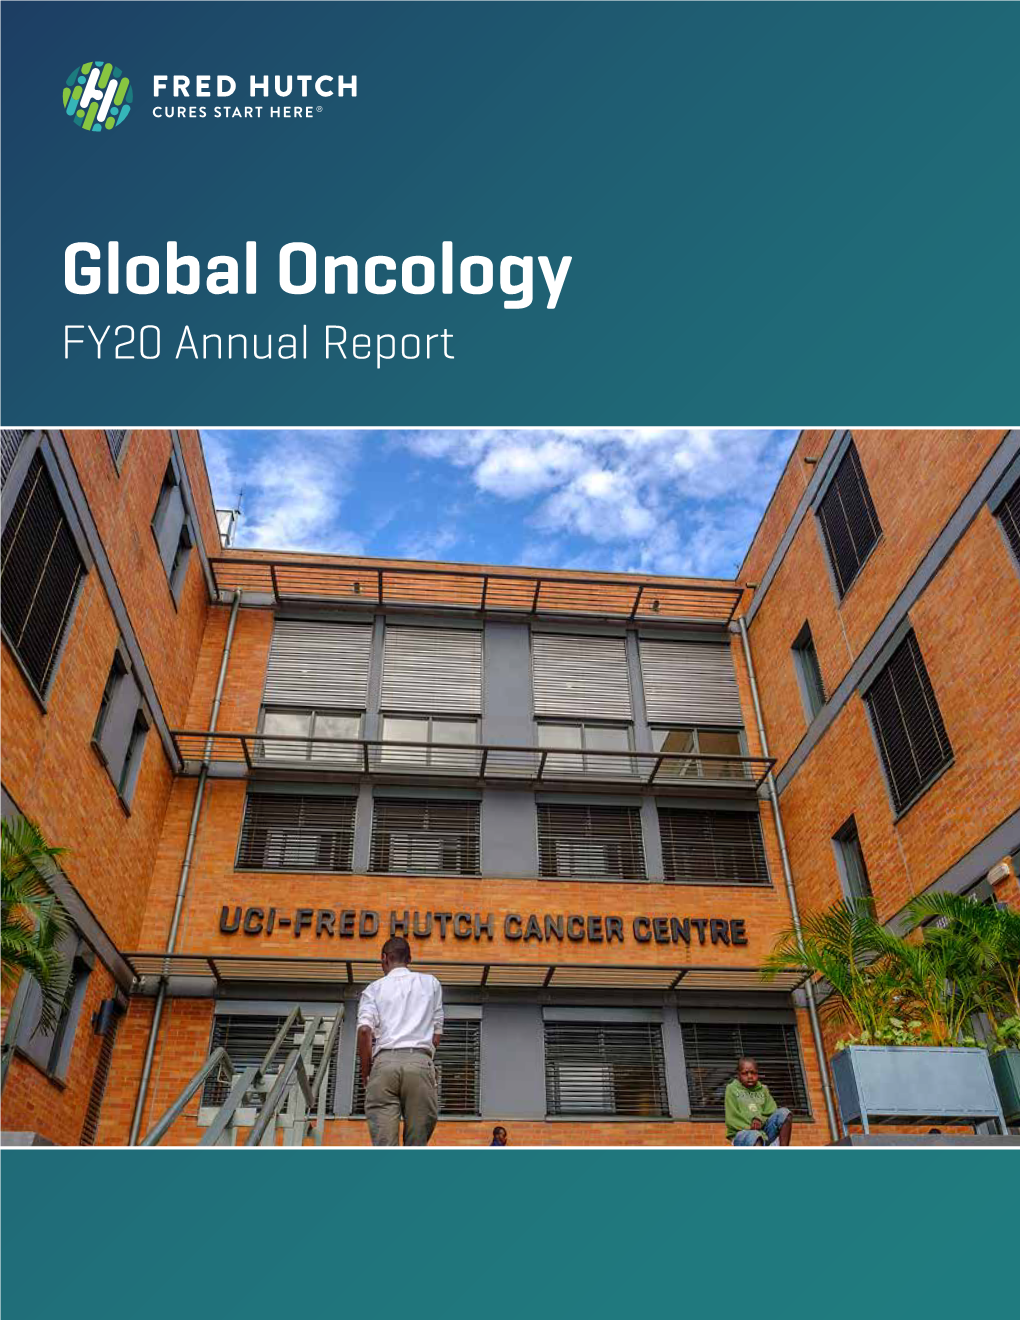 Global Oncology FY20 Annual Report Specimen Is Being Examined at Histopathology Lab at UCI-Fred Hutch Cancer Centre by Diana Basemera